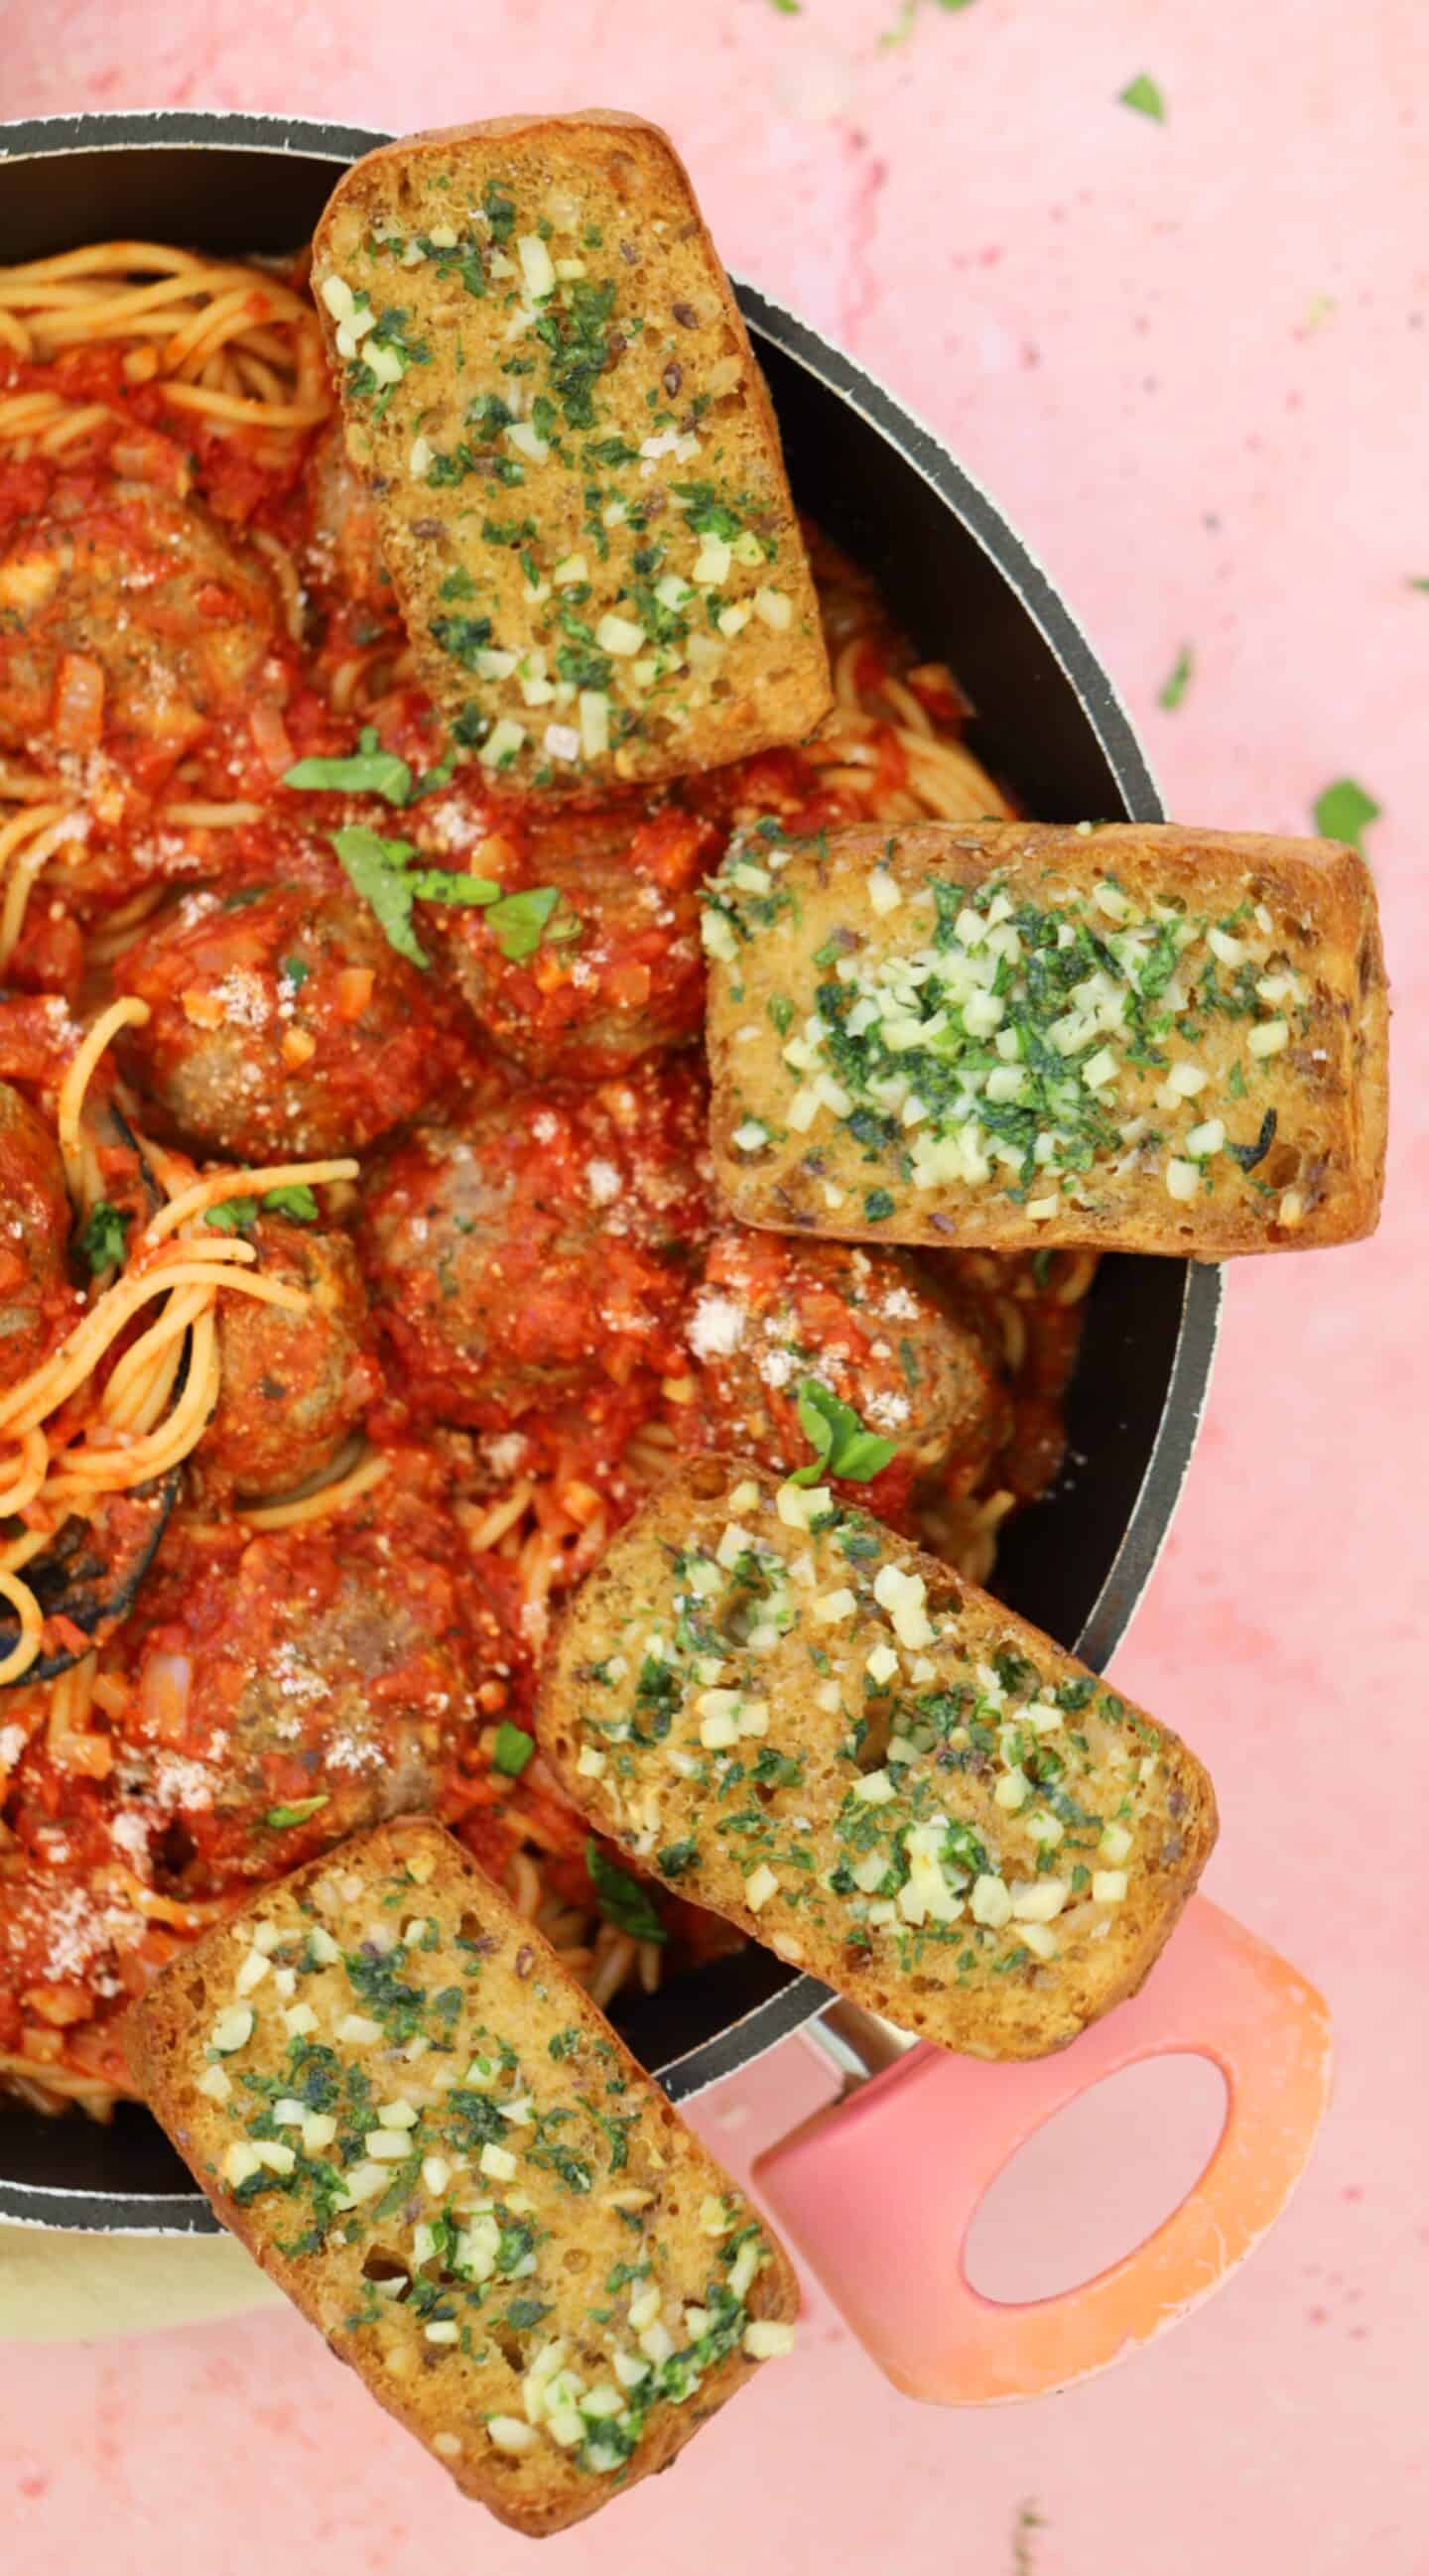 Gluten free garlic bread in a pan with spaghetti and meatballs.